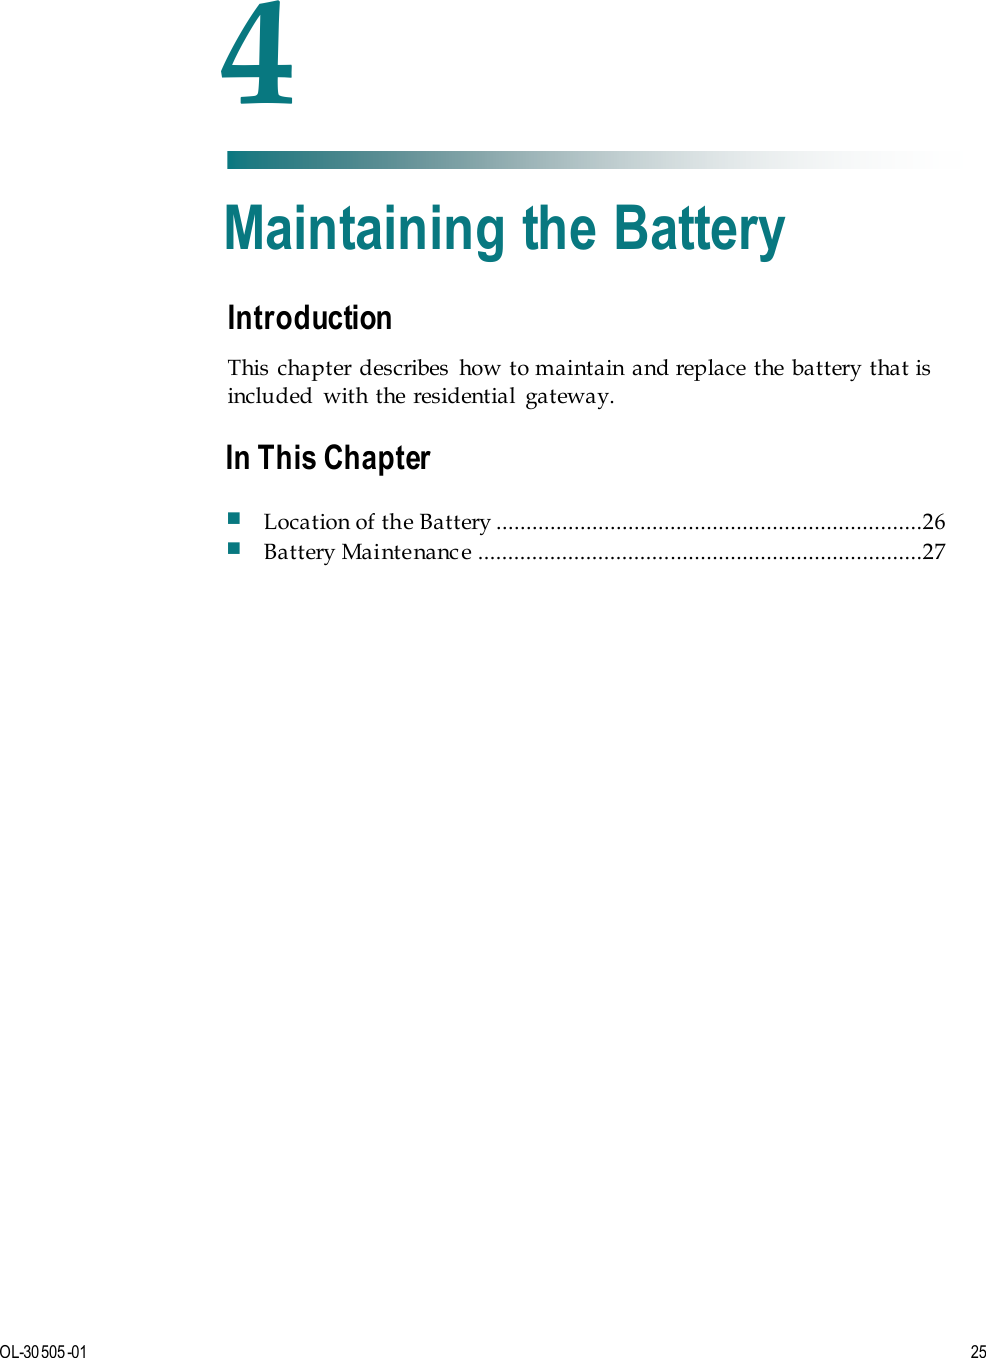   OL-30505-01 25  Introduction This  chapter  describes  how to maintain and replace the battery that is included  with the residential  gateway.      4 Chapter 4 Maintaining the Battery In This Chapter  Location of the Battery .......................................................................26  Battery Maintenance ..........................................................................27 